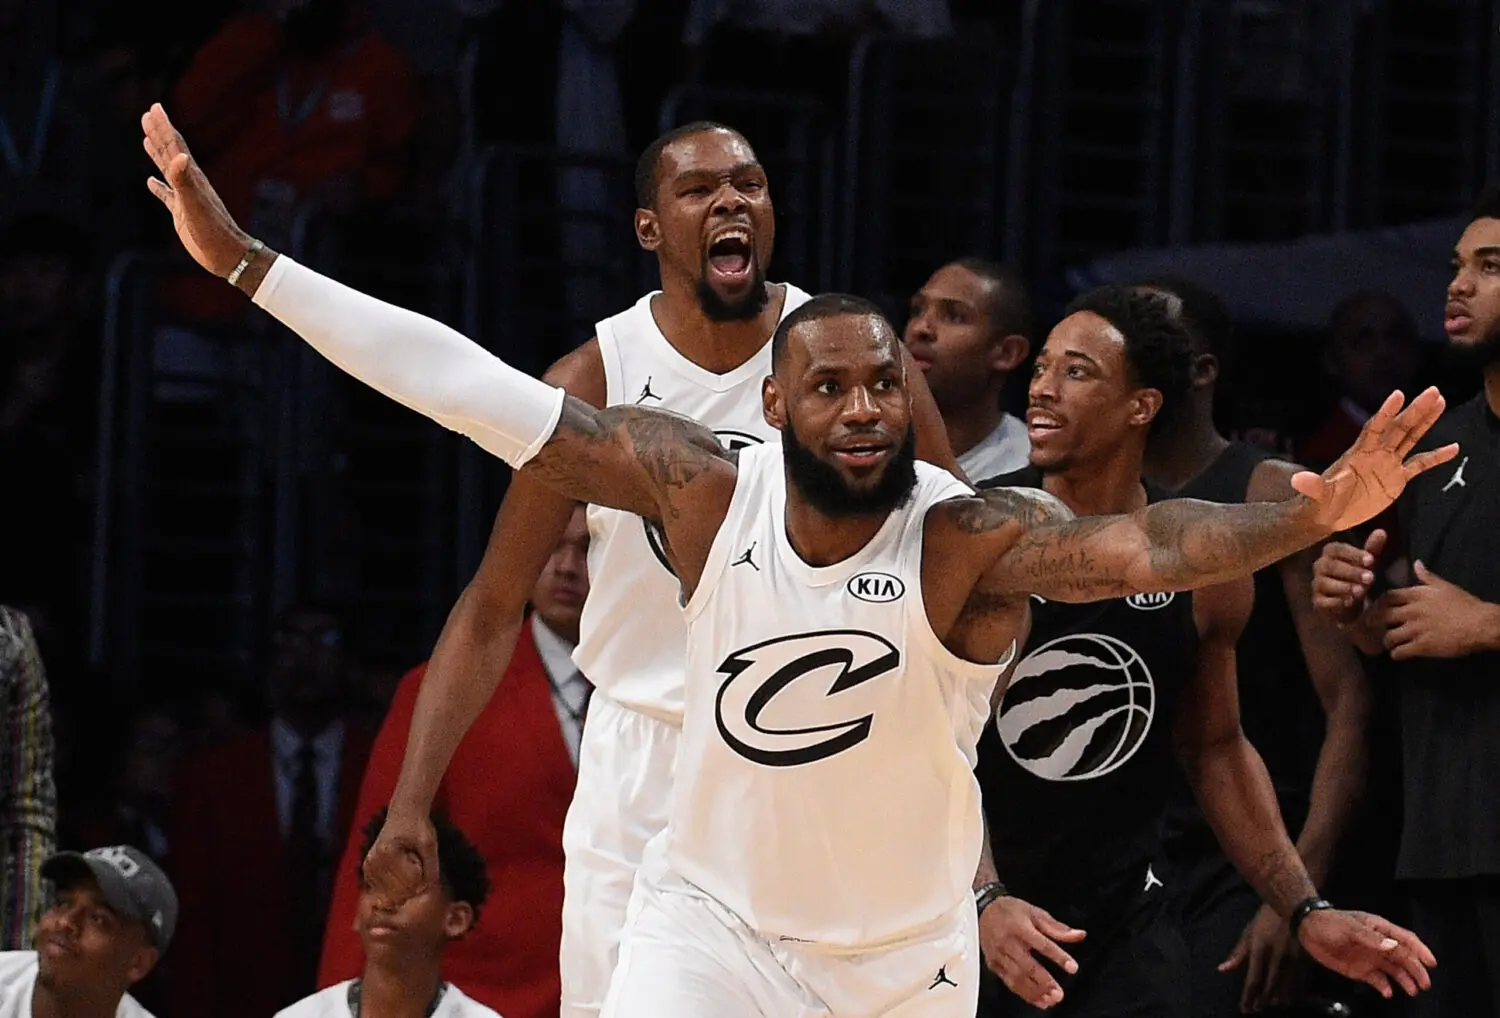 LOS ANGELES, CA - FEBRUARY 18: LeBron James #23 and Kevin Durant #35 (background) of Team LeBron react after a missed last second shot by DeMar DeRozan #10 of Team Stephen (right) during the NBA All-Star Game 2018 at Staples Center on February 18, 2018 in Los Angeles, California. Team LeBron won the game 148-145